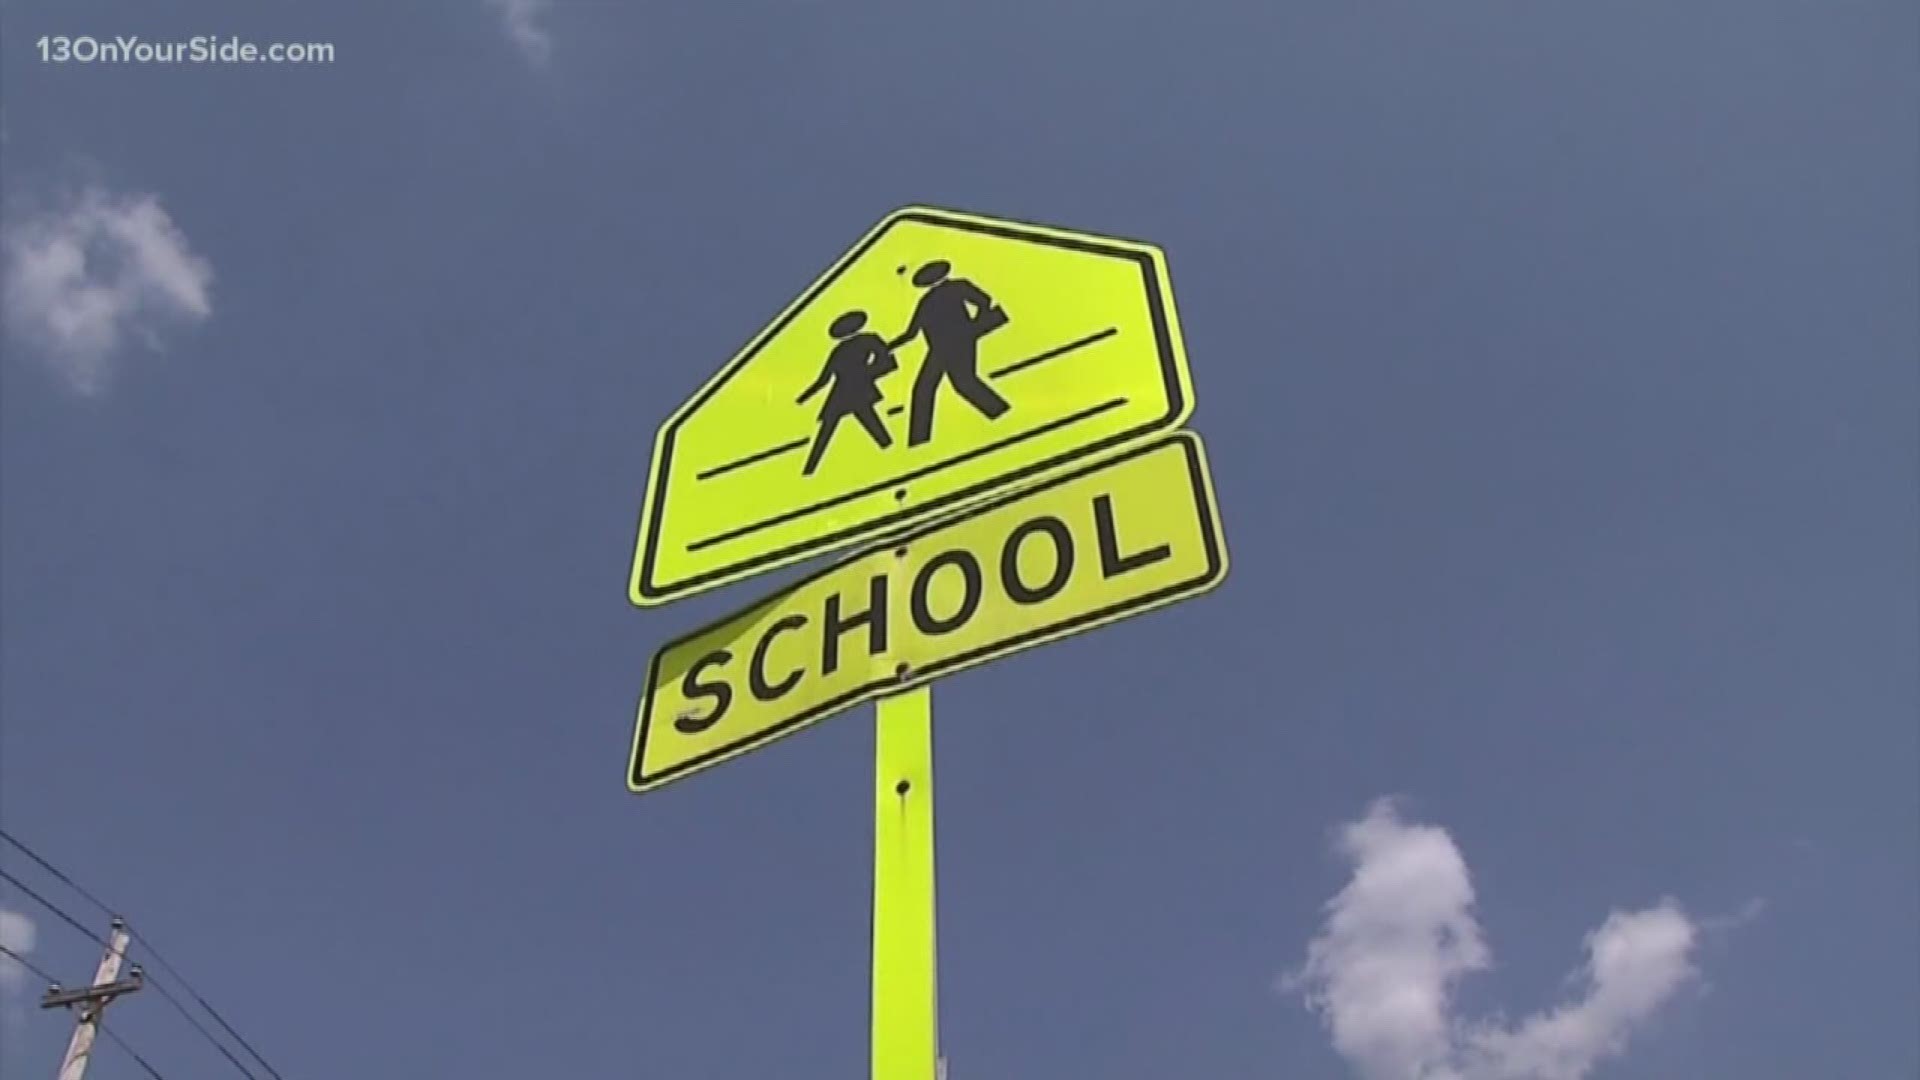 With many Michigan schools back in session, children will be walking, biking and riding the school bus. Making those trips safe is of the utmost importance. AAA’s "School’s Open – Drive Carefully" awareness campaign was created as a way to help reduce the number of child pedestrian deaths and injuries.